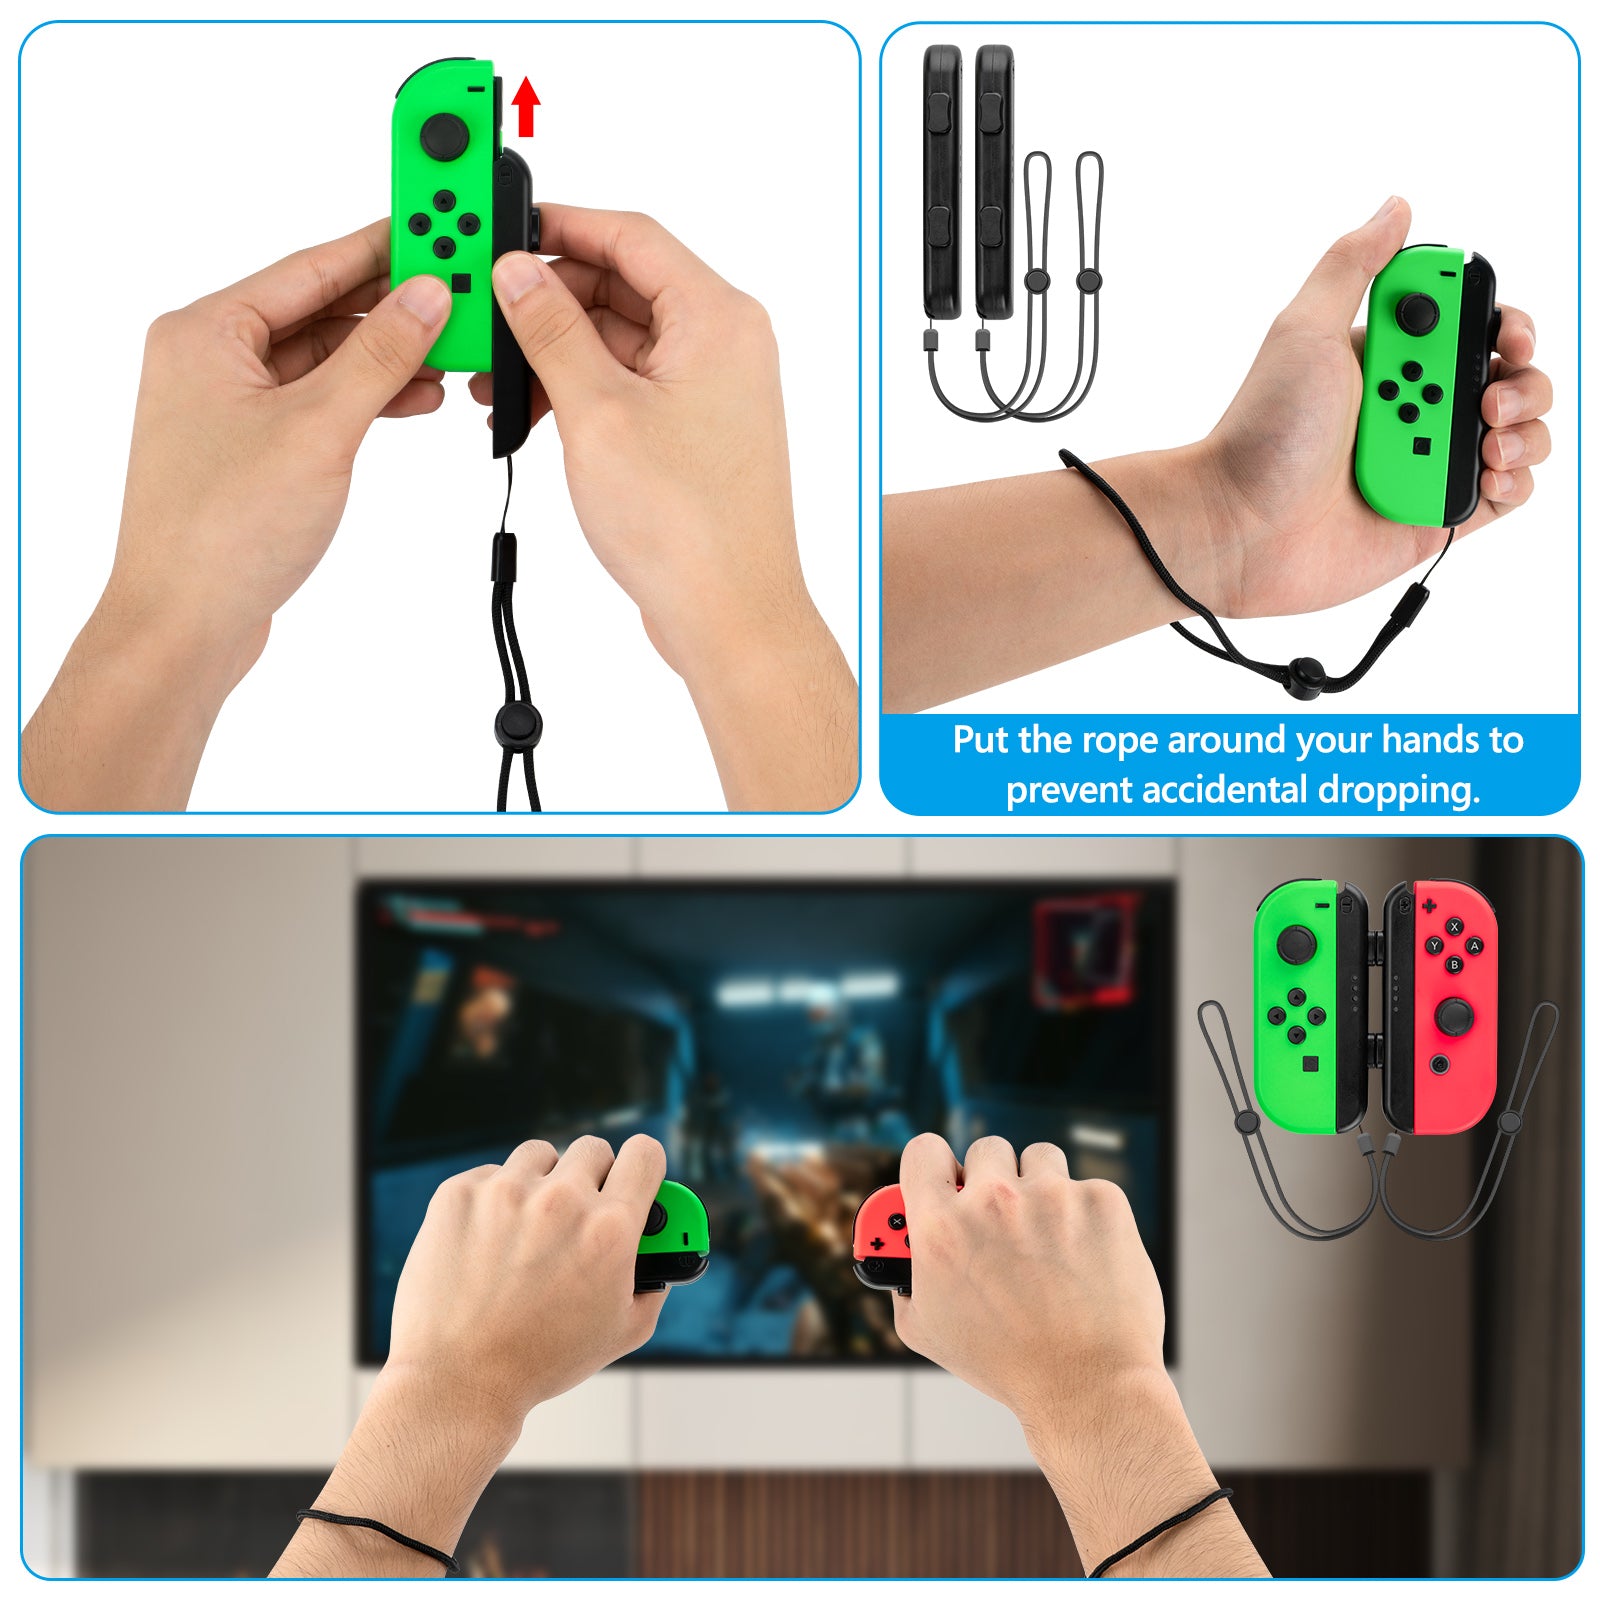 Geekria Sports Accessories Bundle Compatible with Nintendo Switch Spor